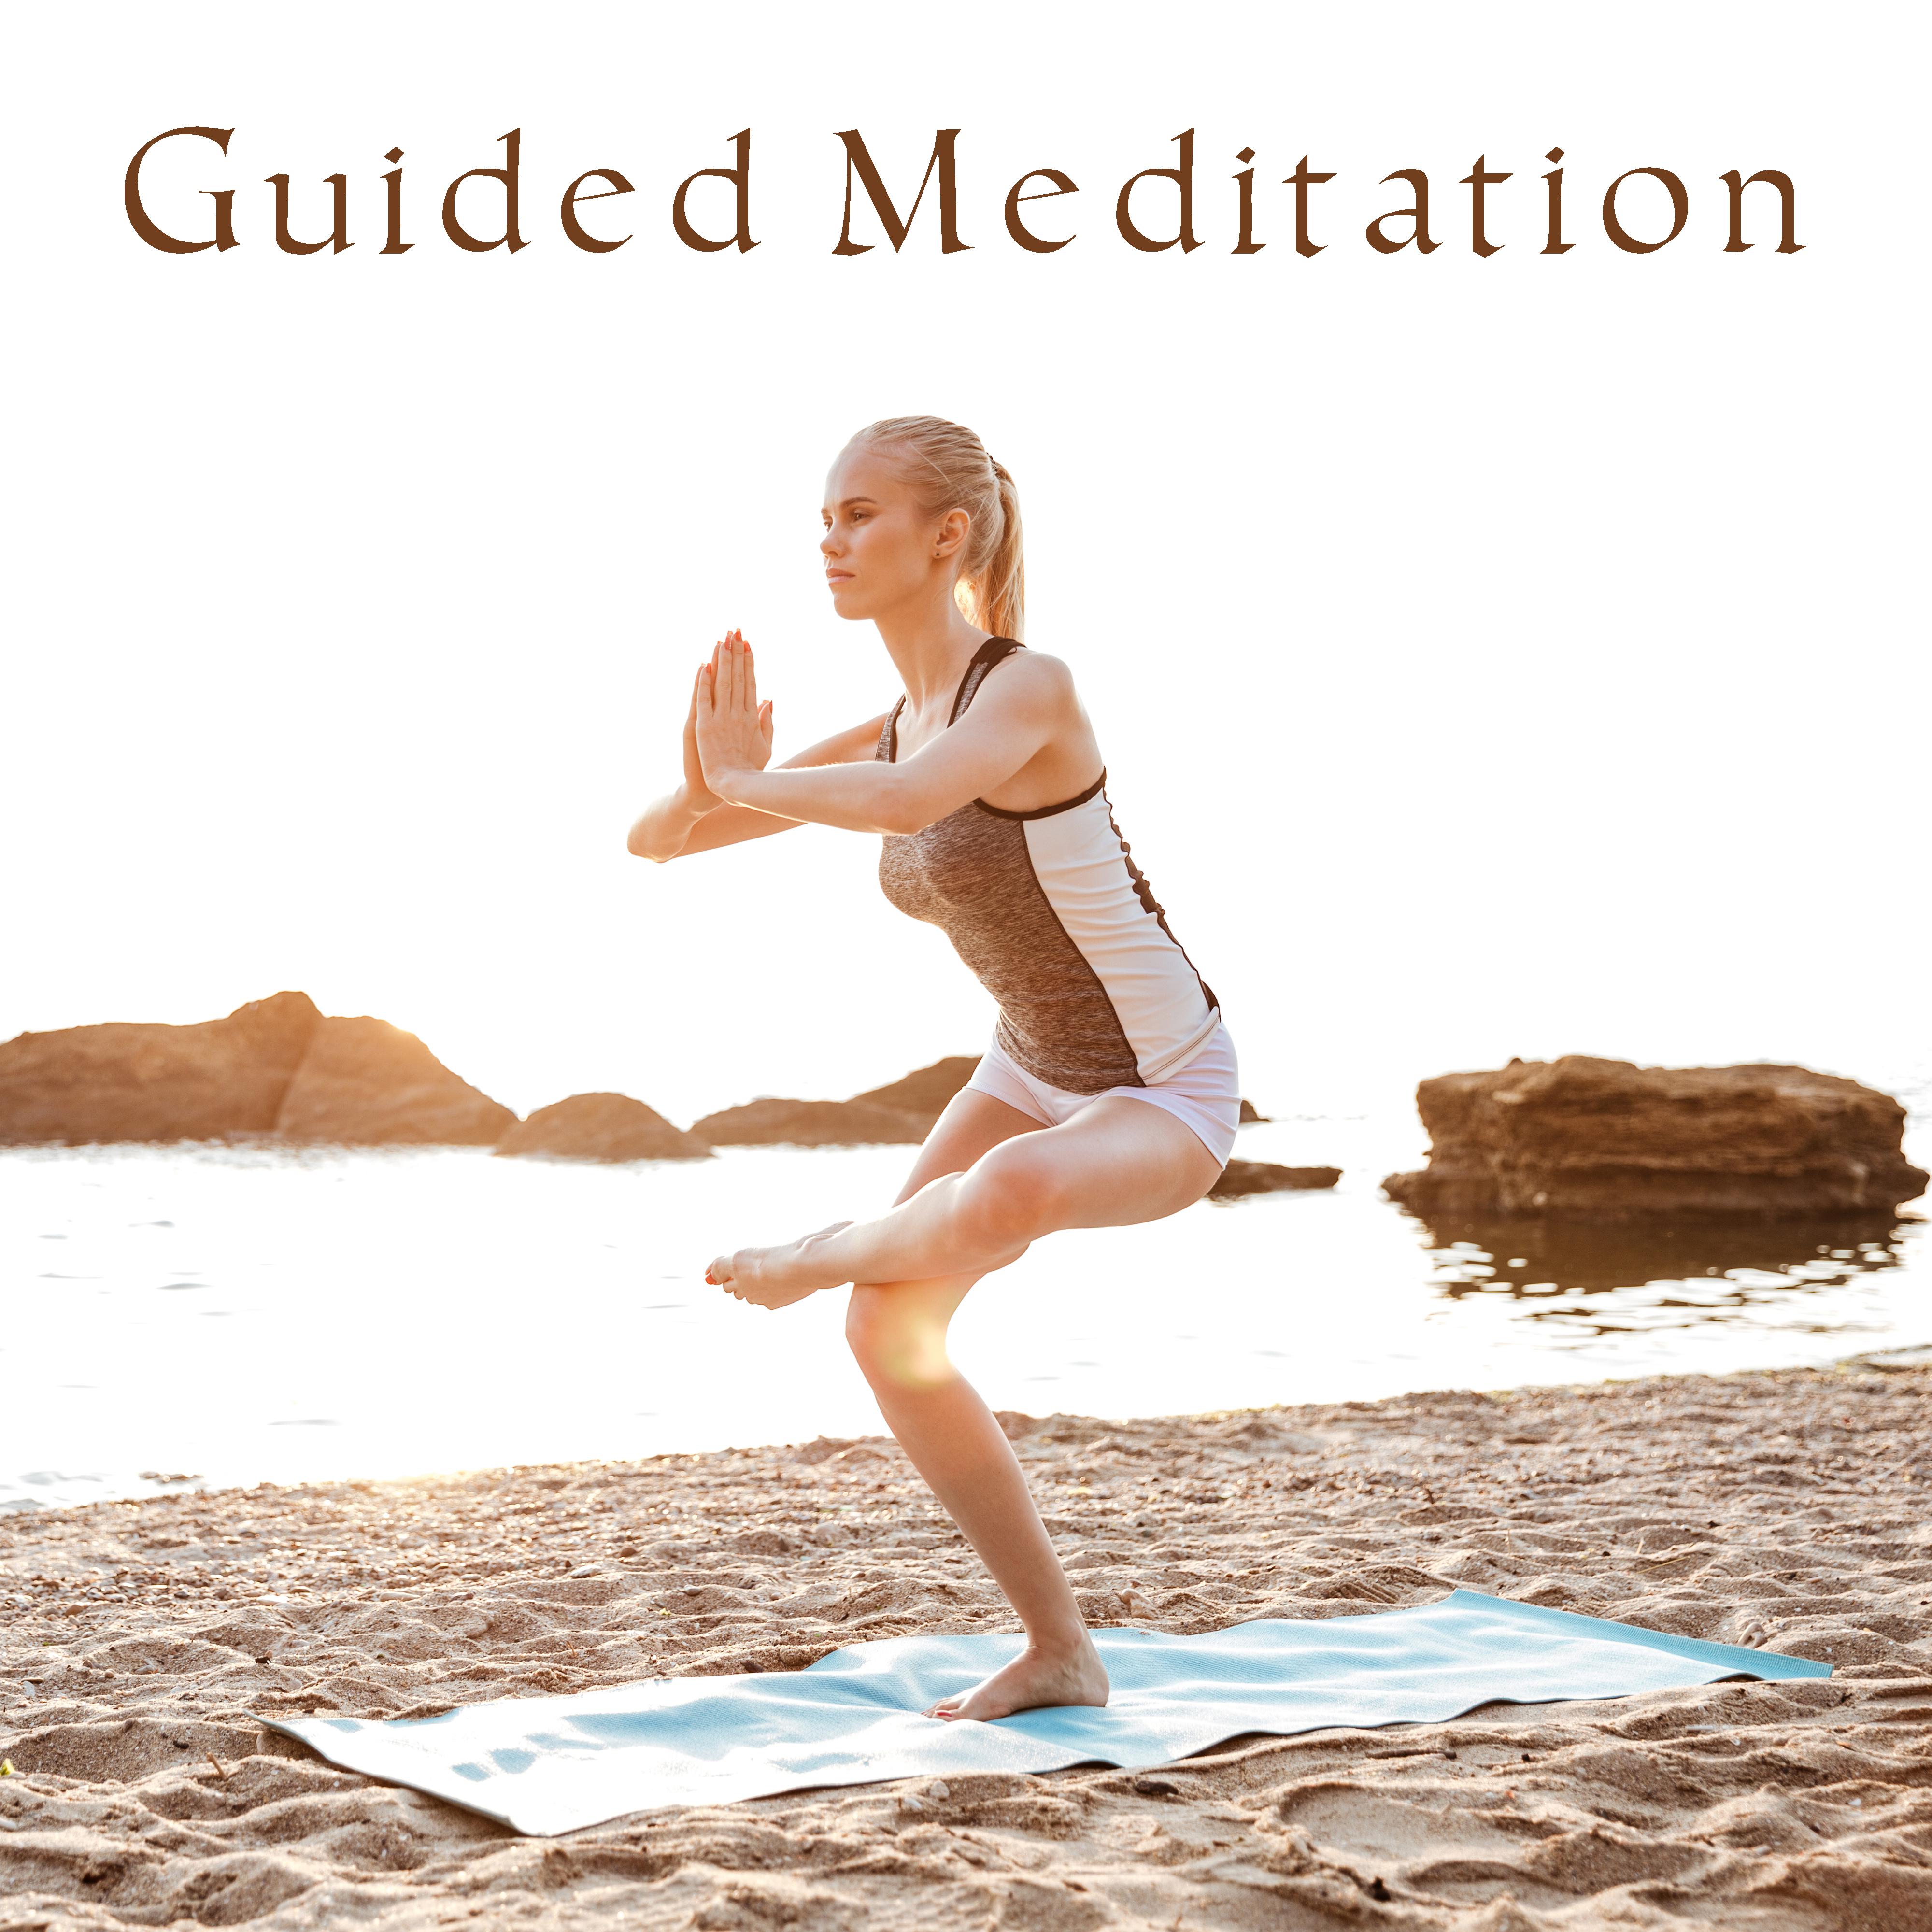 Guided Meditation – Calm Music to Meditate, Inner Calmness, Peaceful Mind & Body, Yoga Sounds